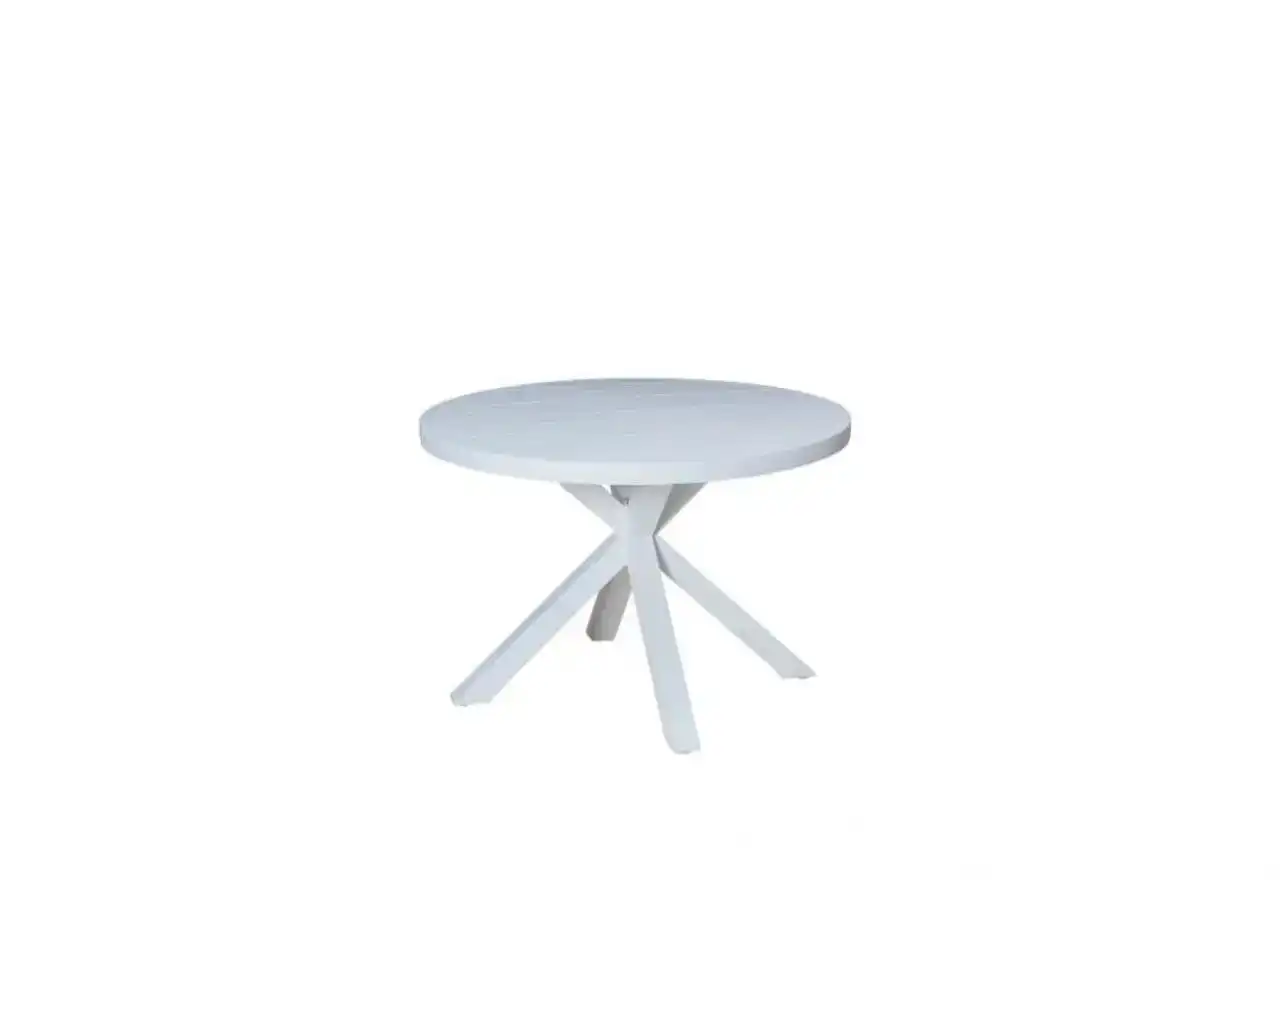 Jette Round Dining Table 107.5cm (white)